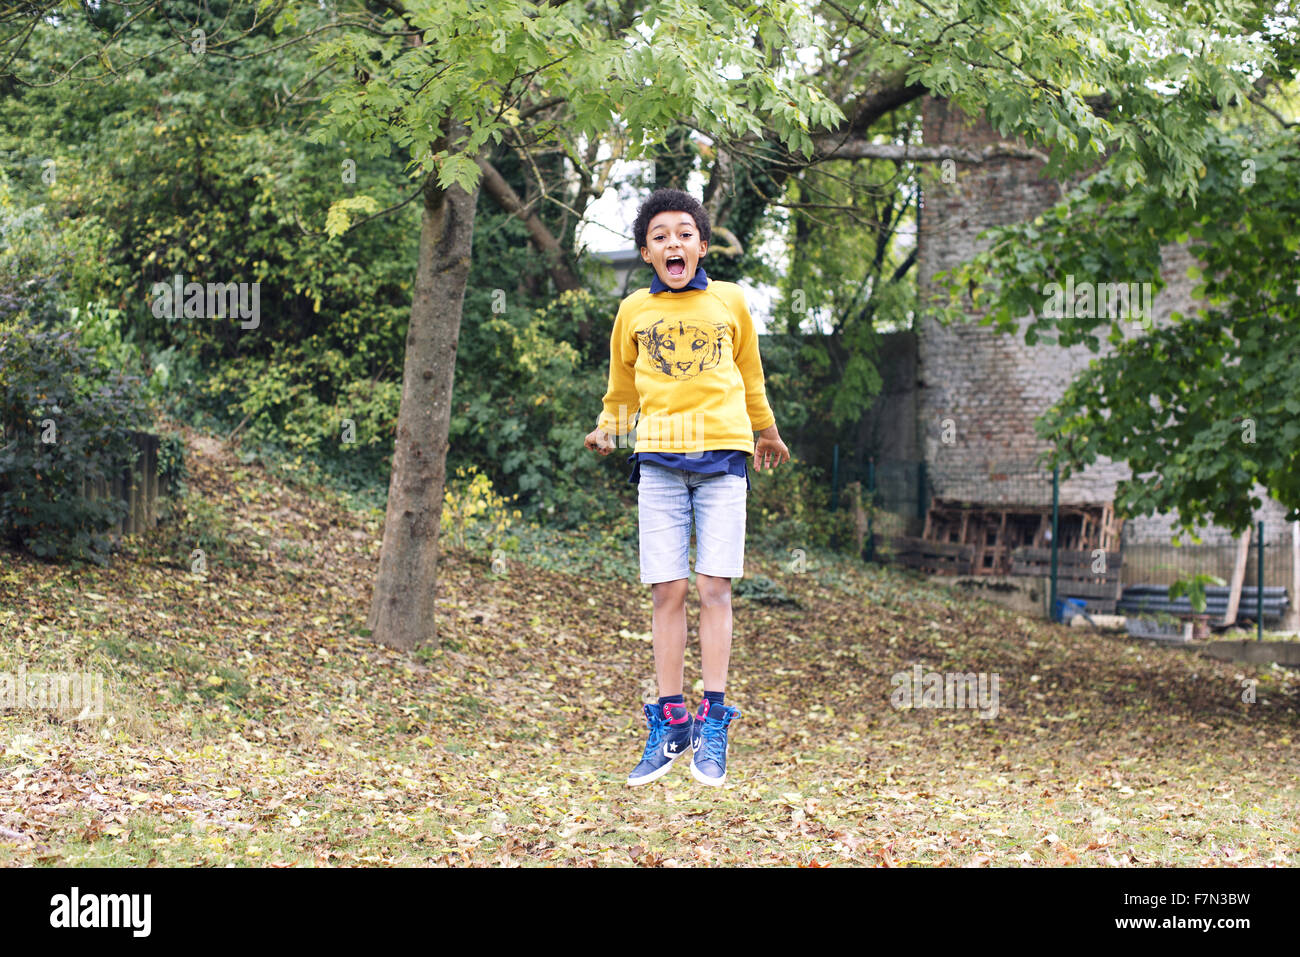 Boy jumping in midair outdoors Stock Photo